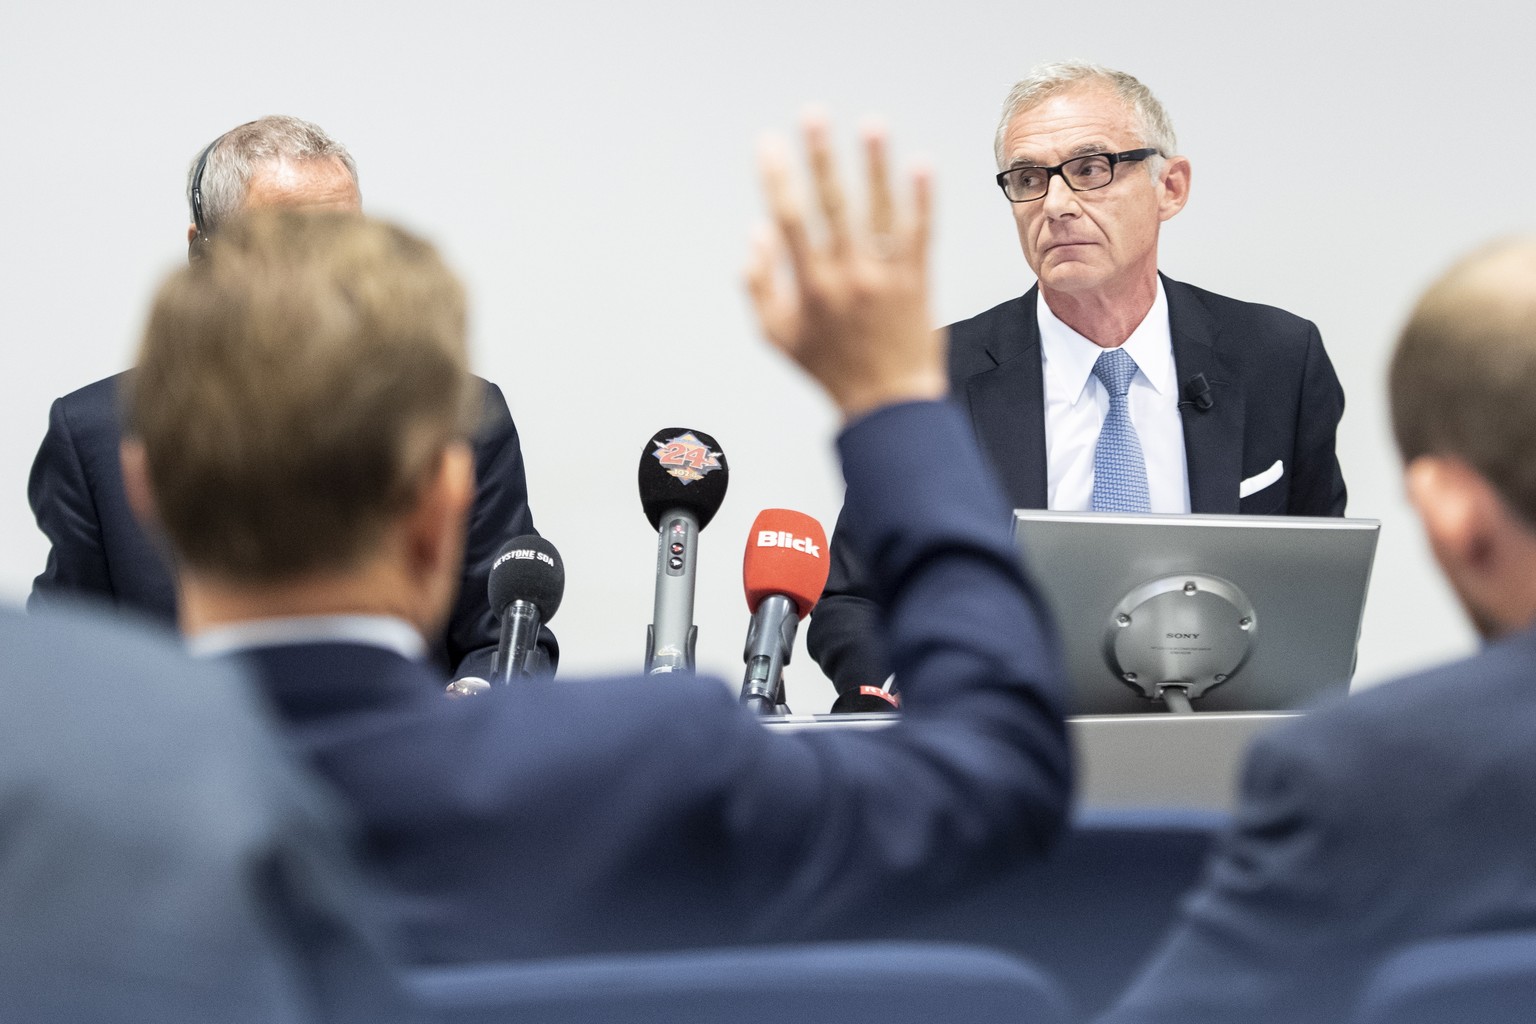 epa07884358 Urs Rohner, chairman of Credit Suisse looks on during a press conference on the Observation of Iqbal Khan, in Zurich, Switzerland, 01 October 2019. EPA/ENNIO LEANZA